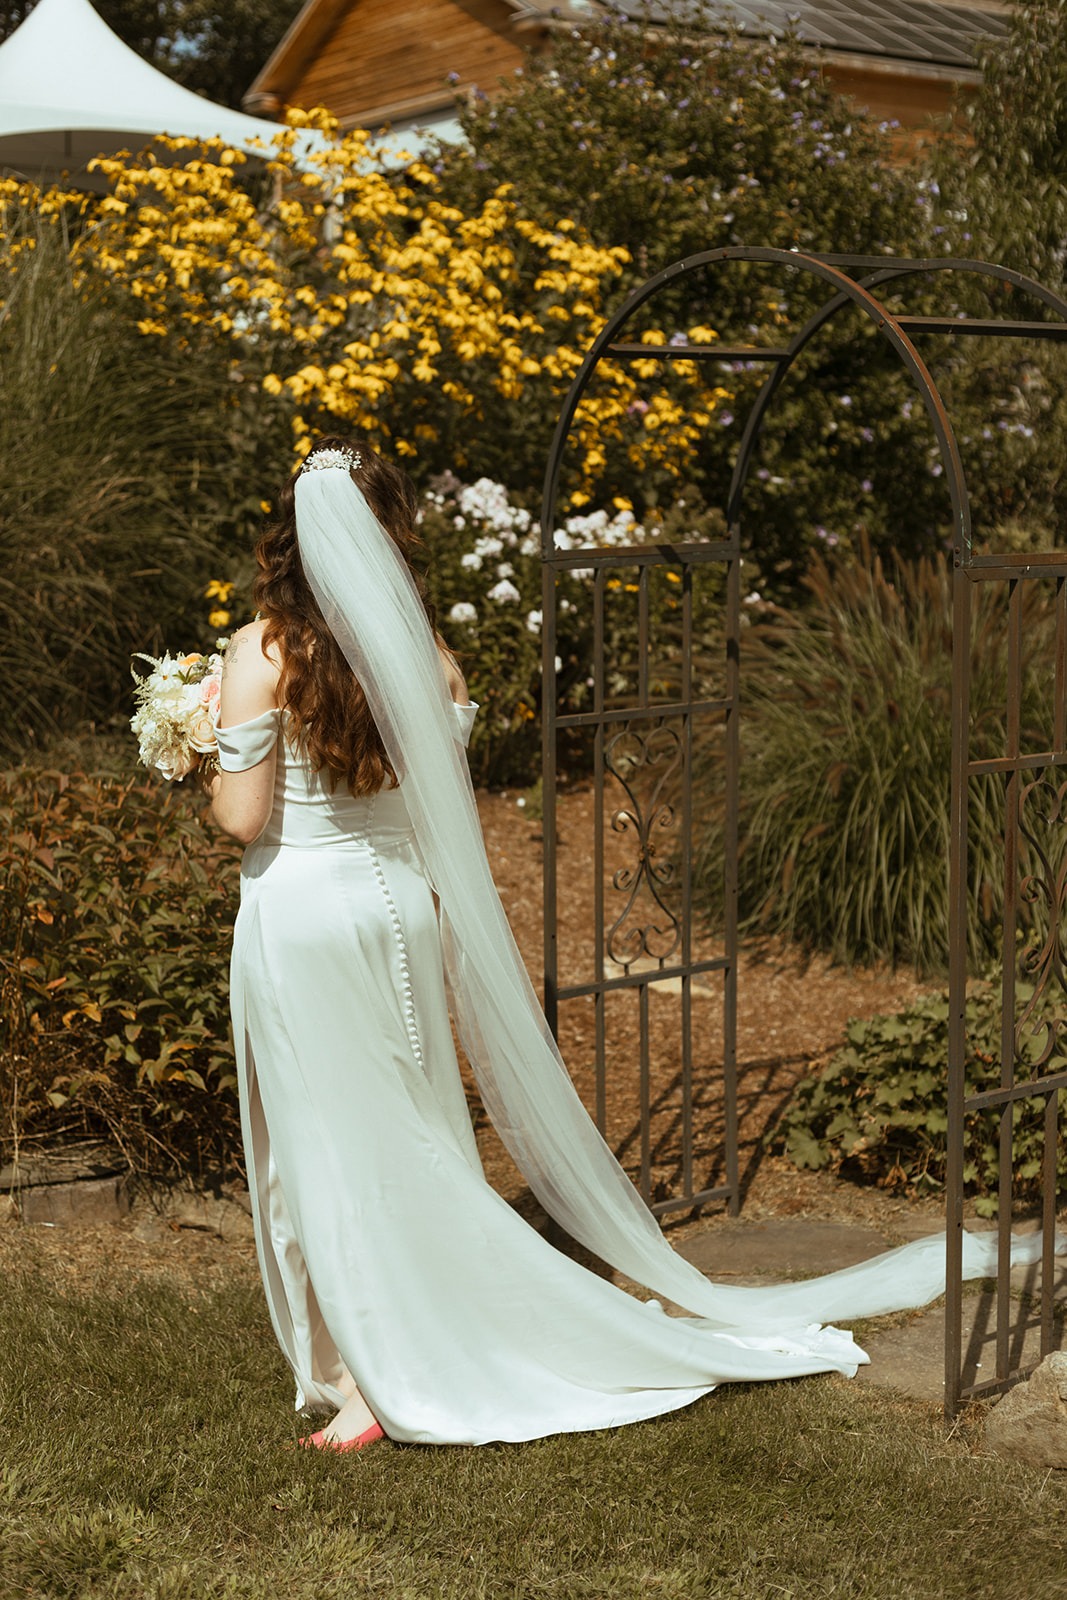 off the shoulder wedding gown with long veil